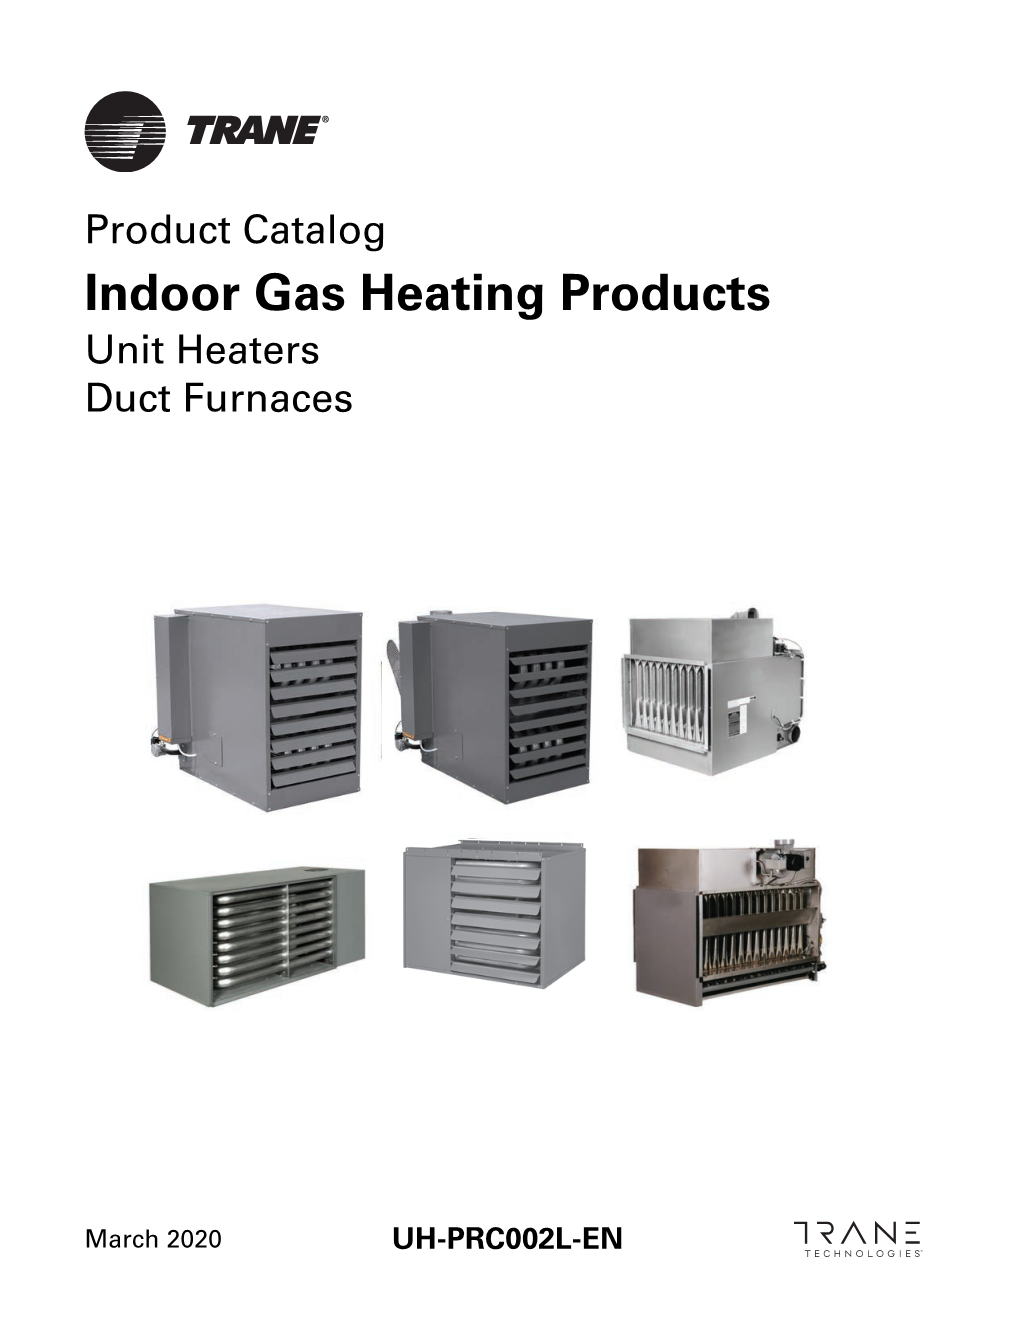 Indoor Gas Heating Products Unit Heaters Duct Furnaces